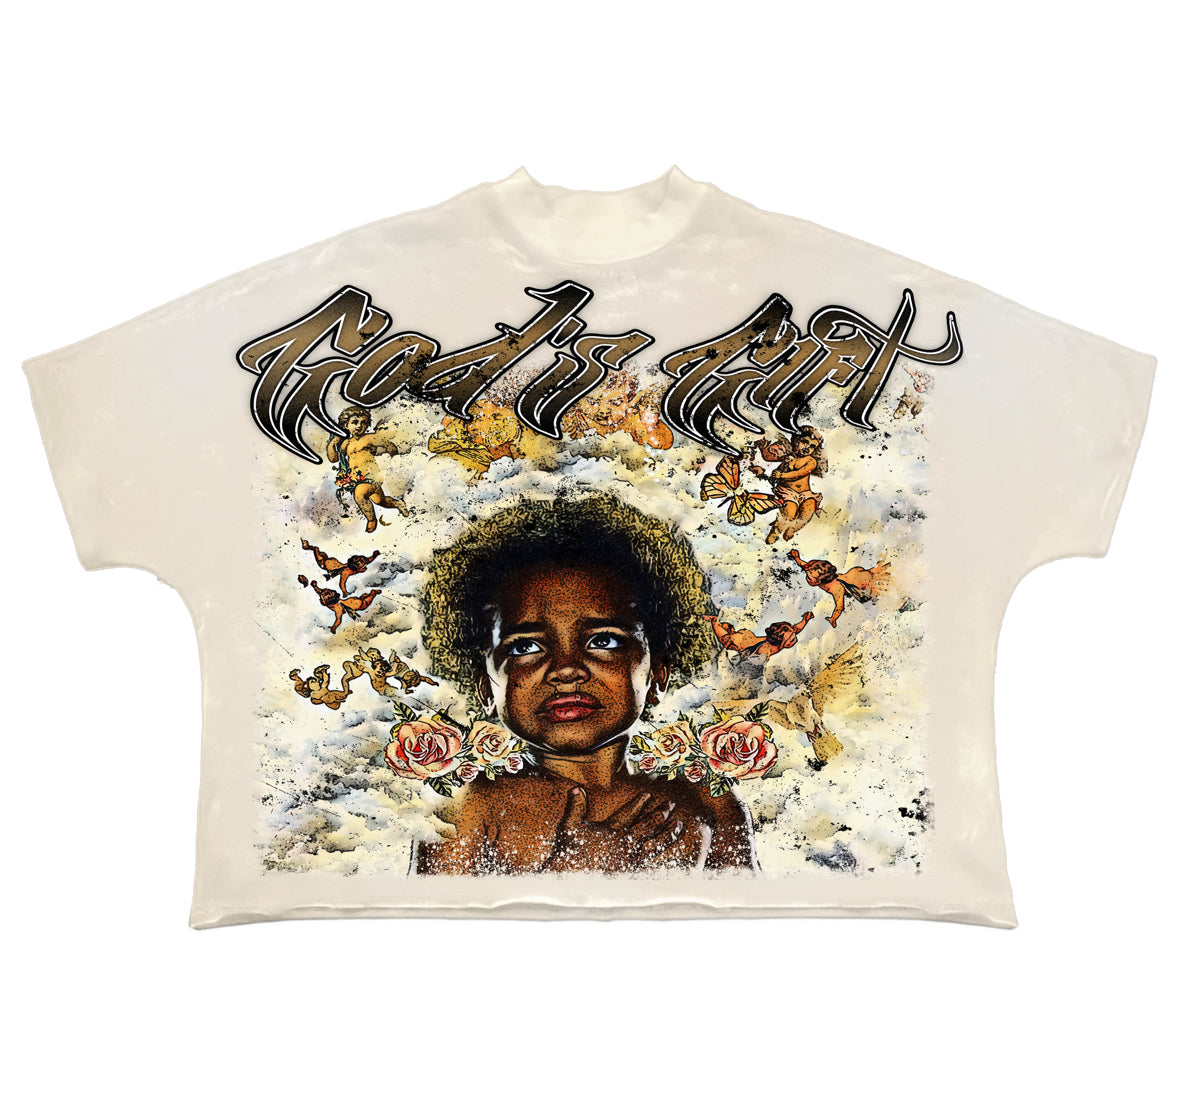 The Gifted Child Tee